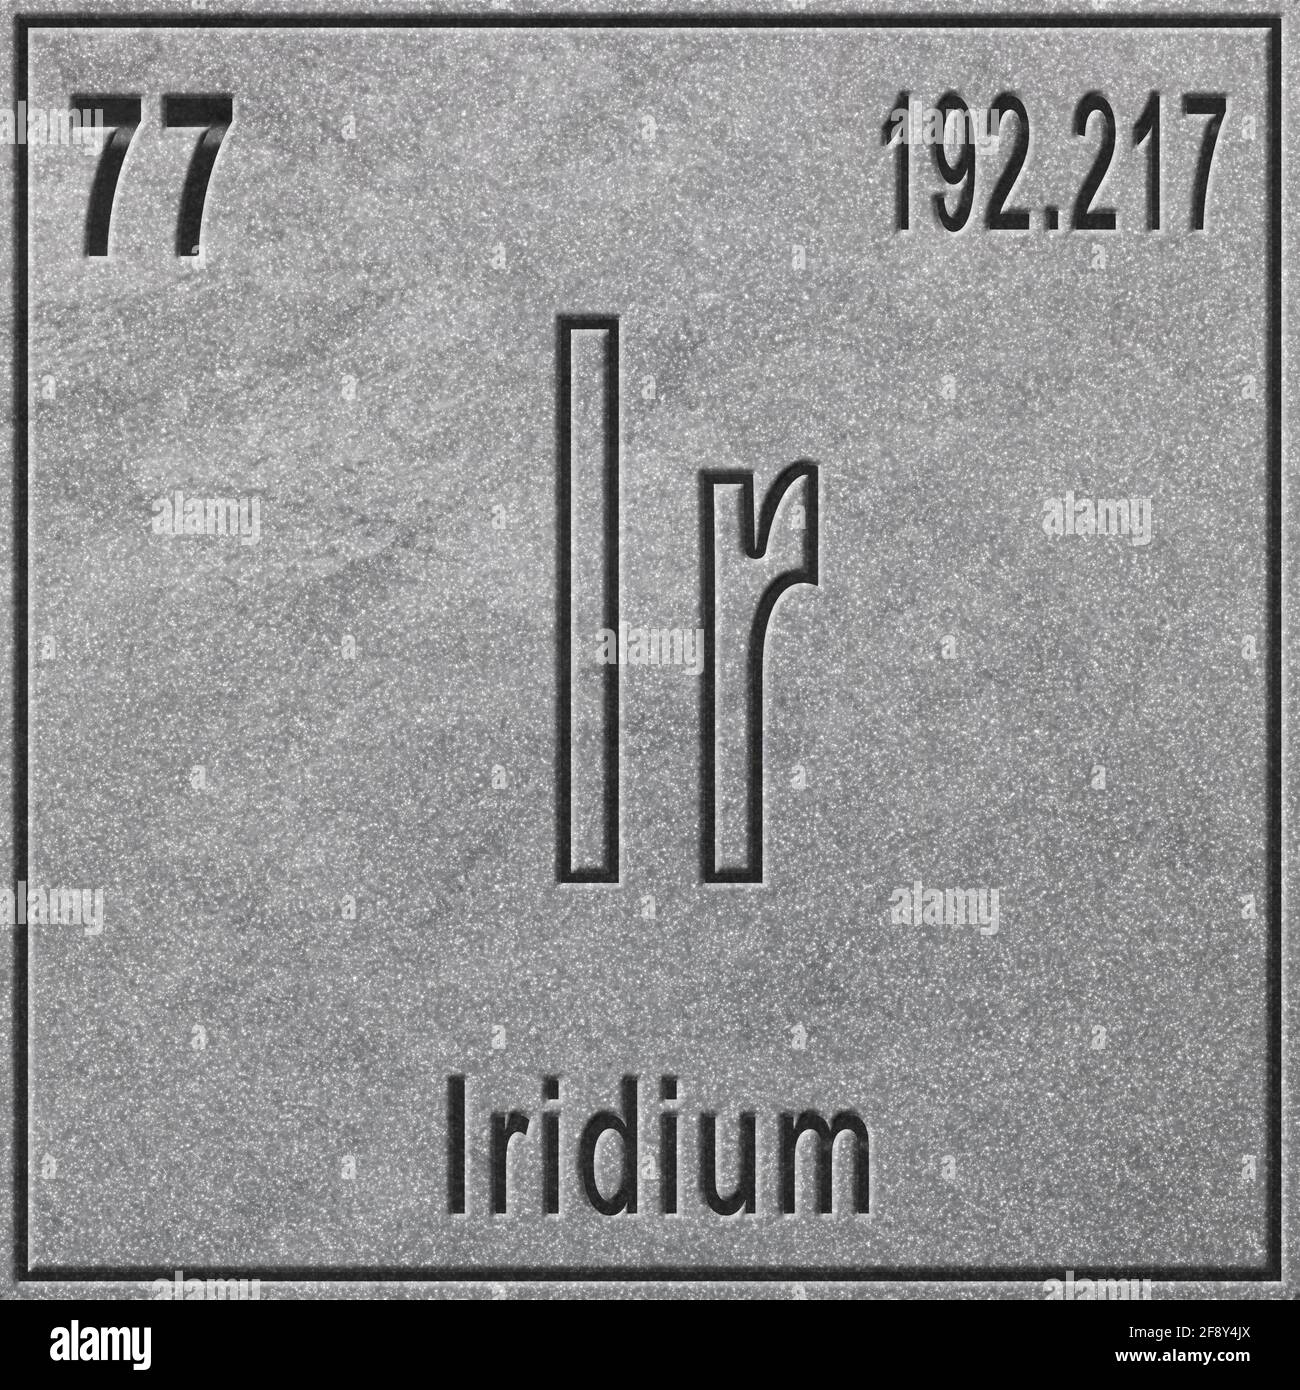 Iridium chemical element, Sign with atomic number and atomic weight, Periodic Table Element, silver background Stock Photo